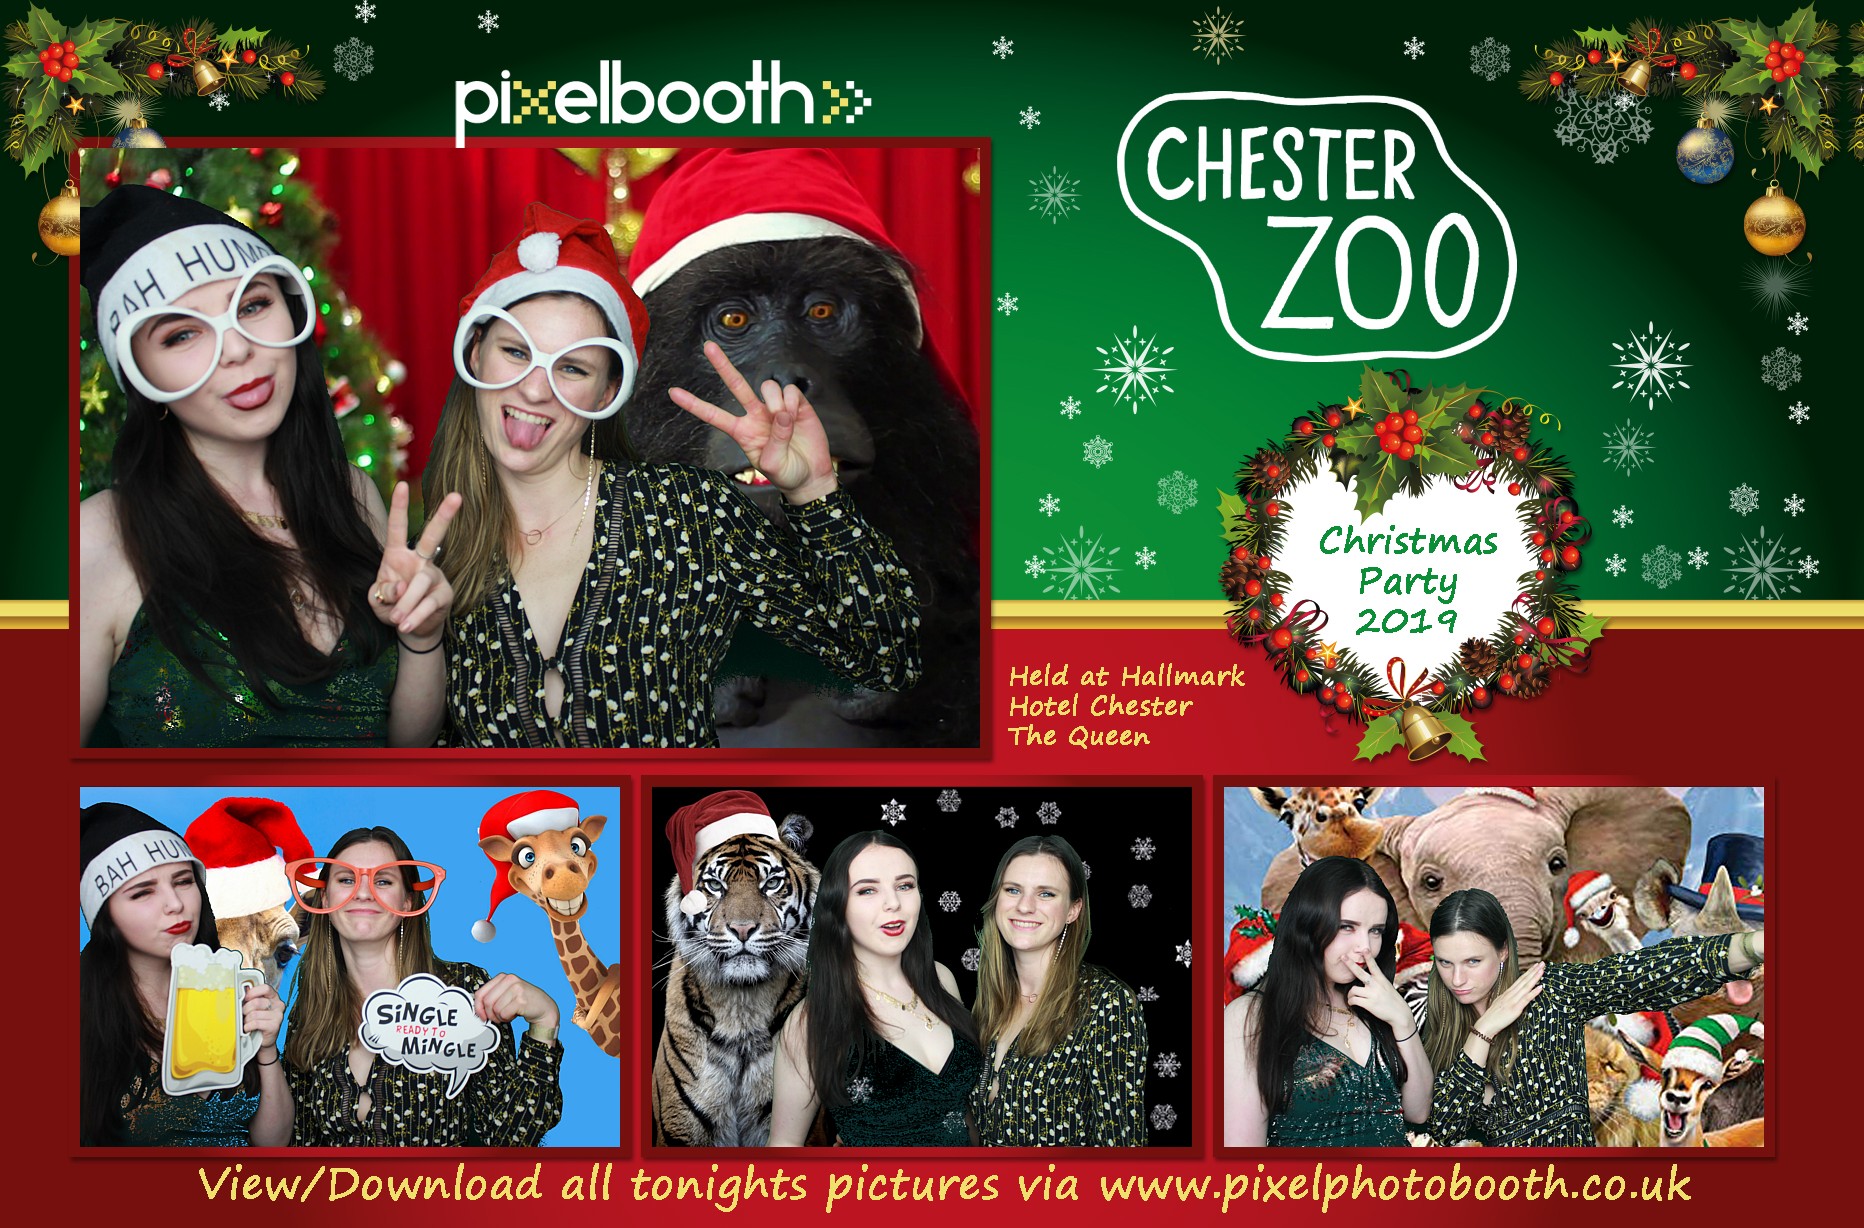 28th Nov 2019: Chester Zoo Christmas Party